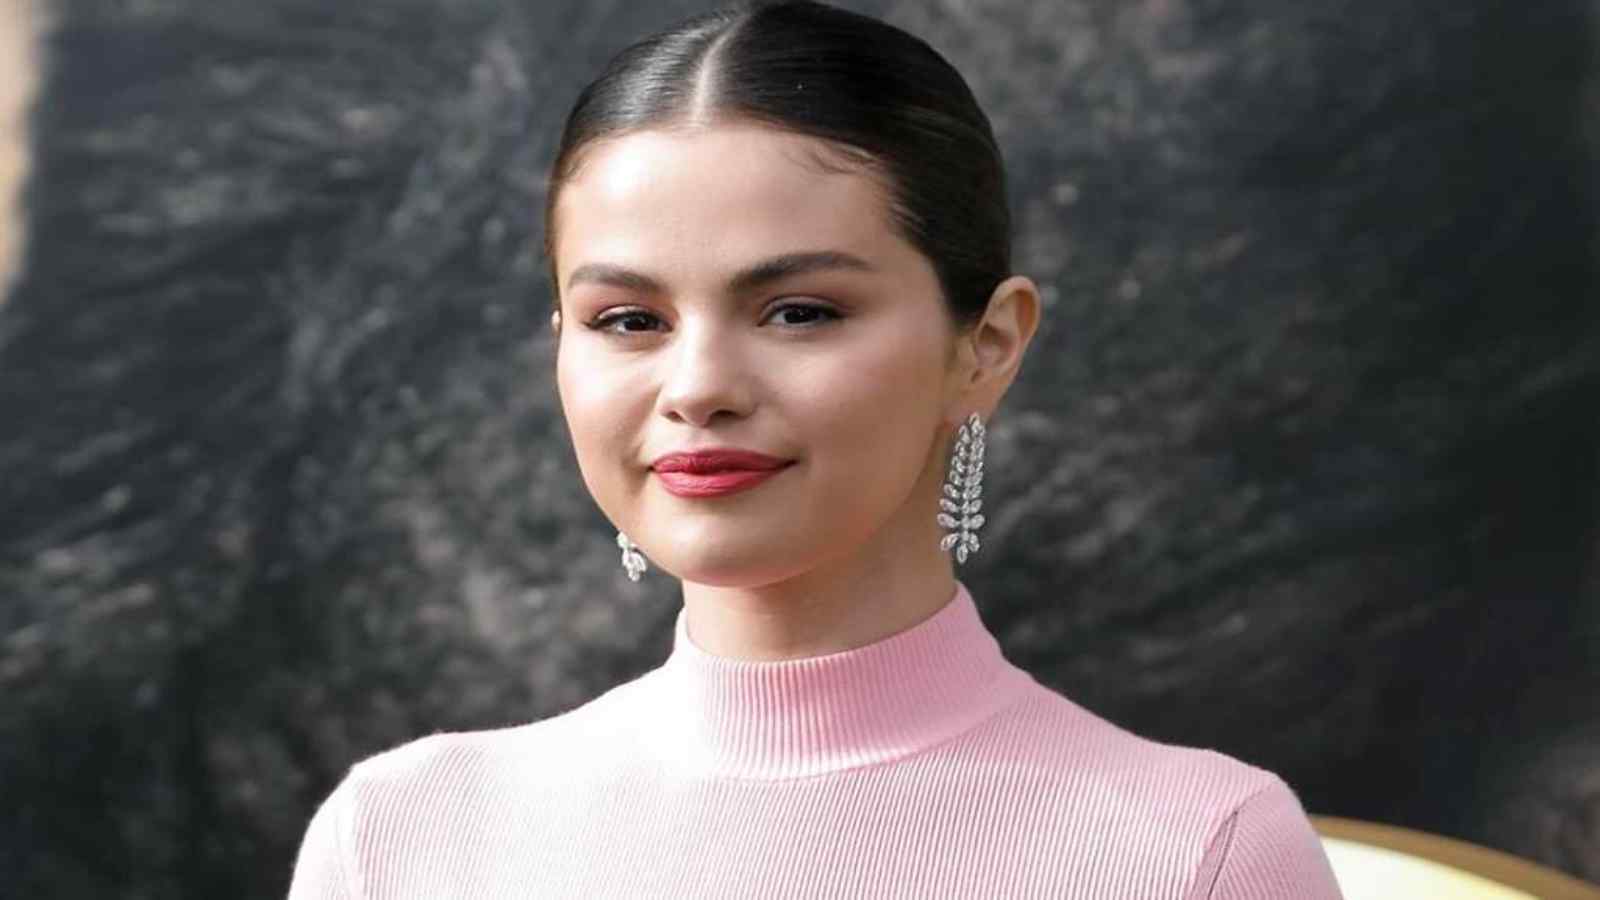 Selena Gomez Mental Health, Her Own Battle, Told Through Her Own Words